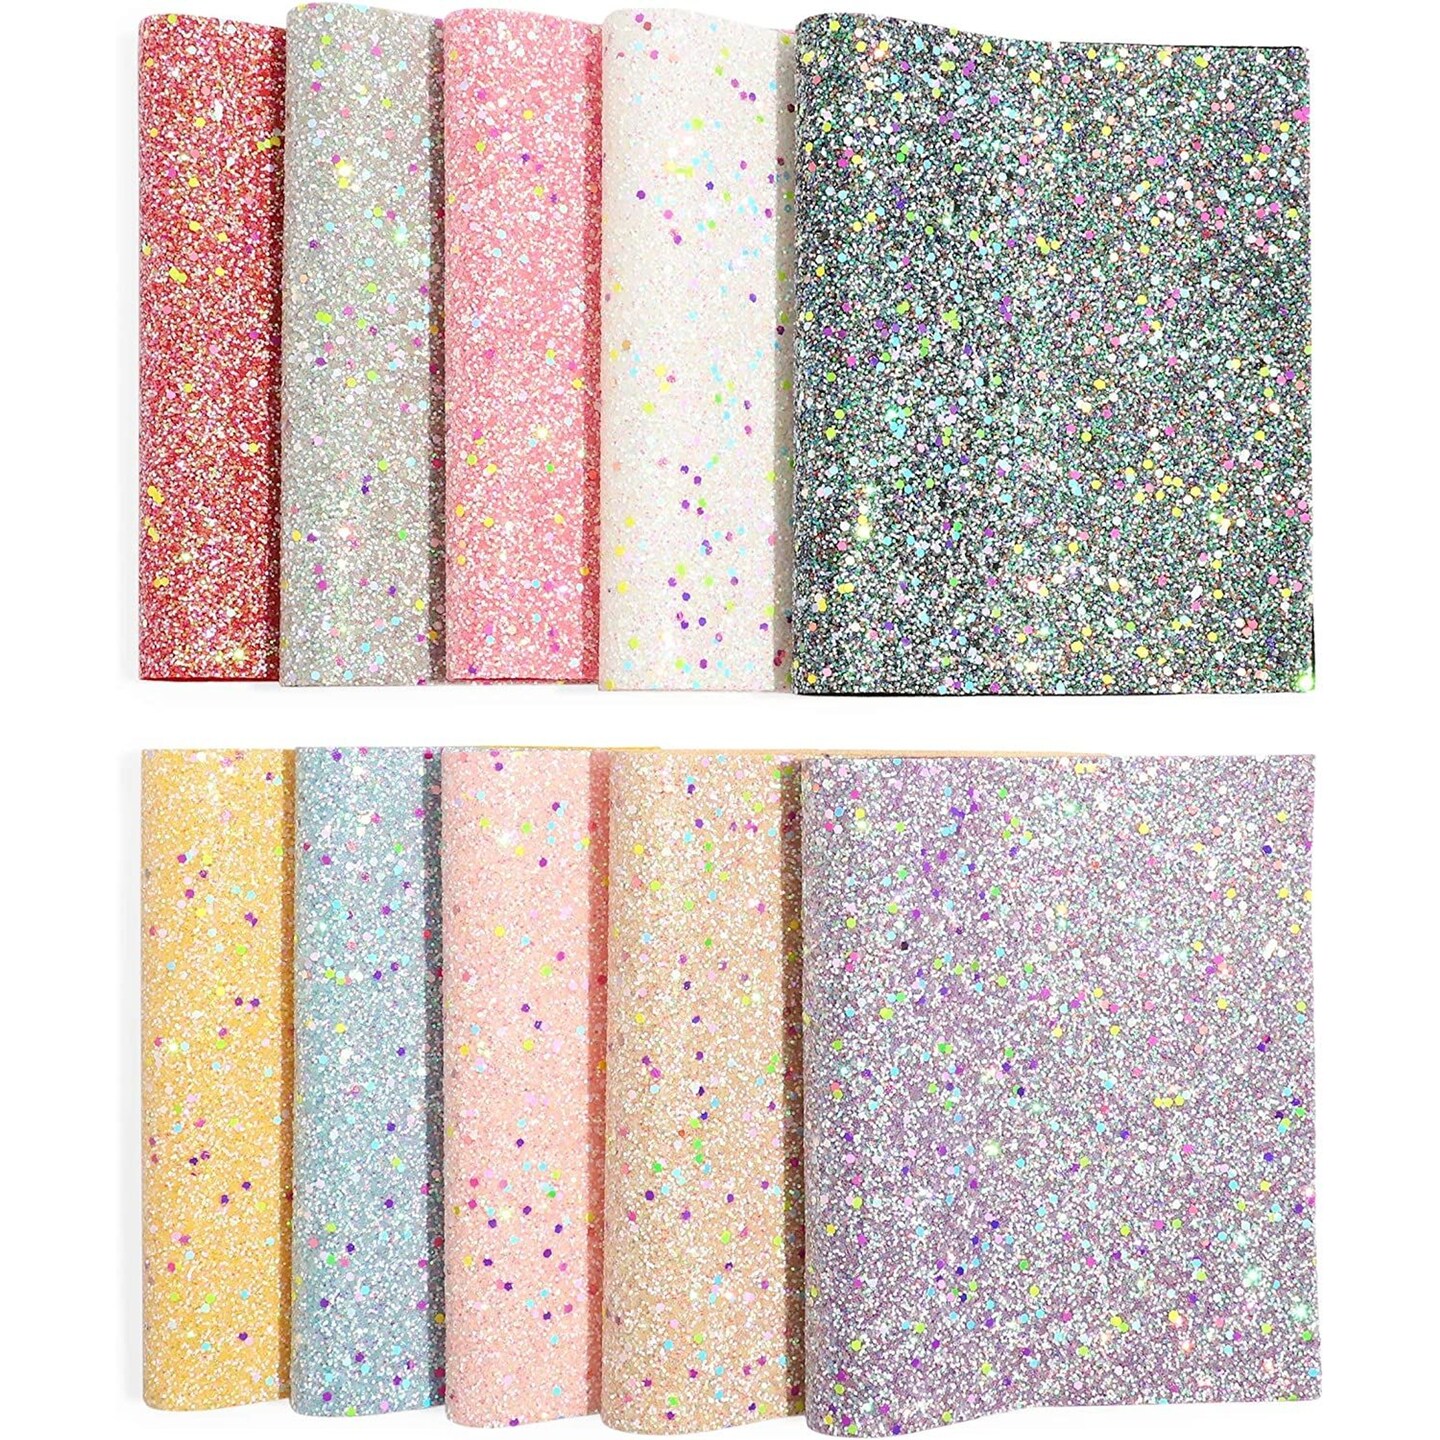 Chunky Glitter Faux Leather - Sequin Fabric PU Leatherette Sheets